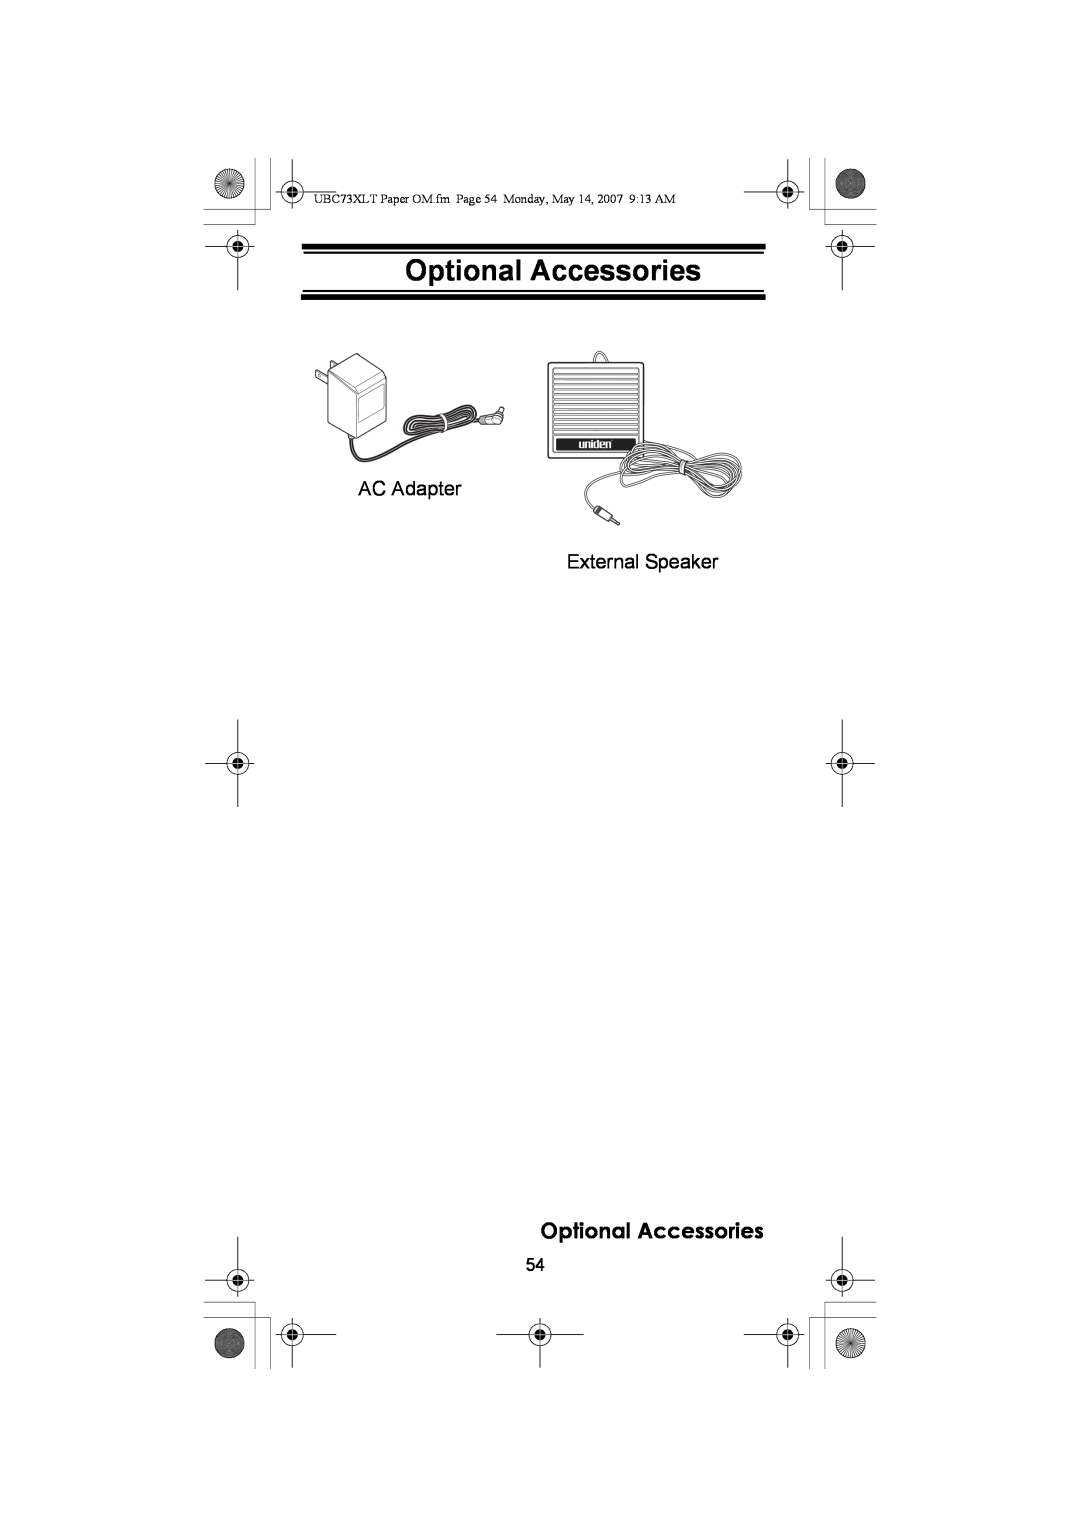 Uniden owner manual Optional Accessories, UBC73XLT Paper OM.fm Page 54 Monday, May 14, 2007 913 AM 